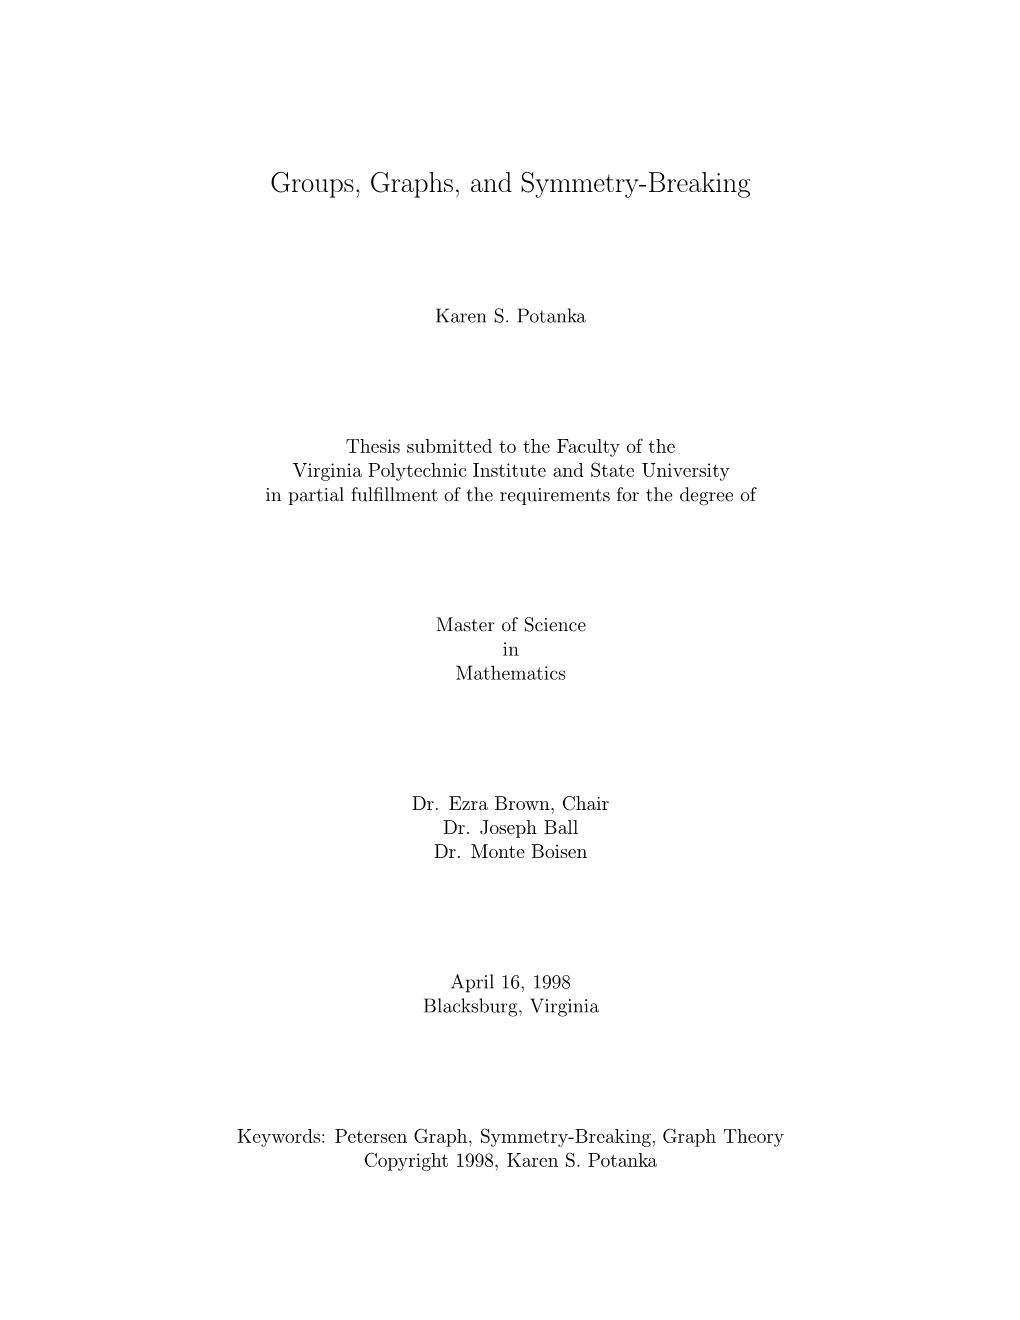 Groups, Graphs, and Symmetry-Breaking